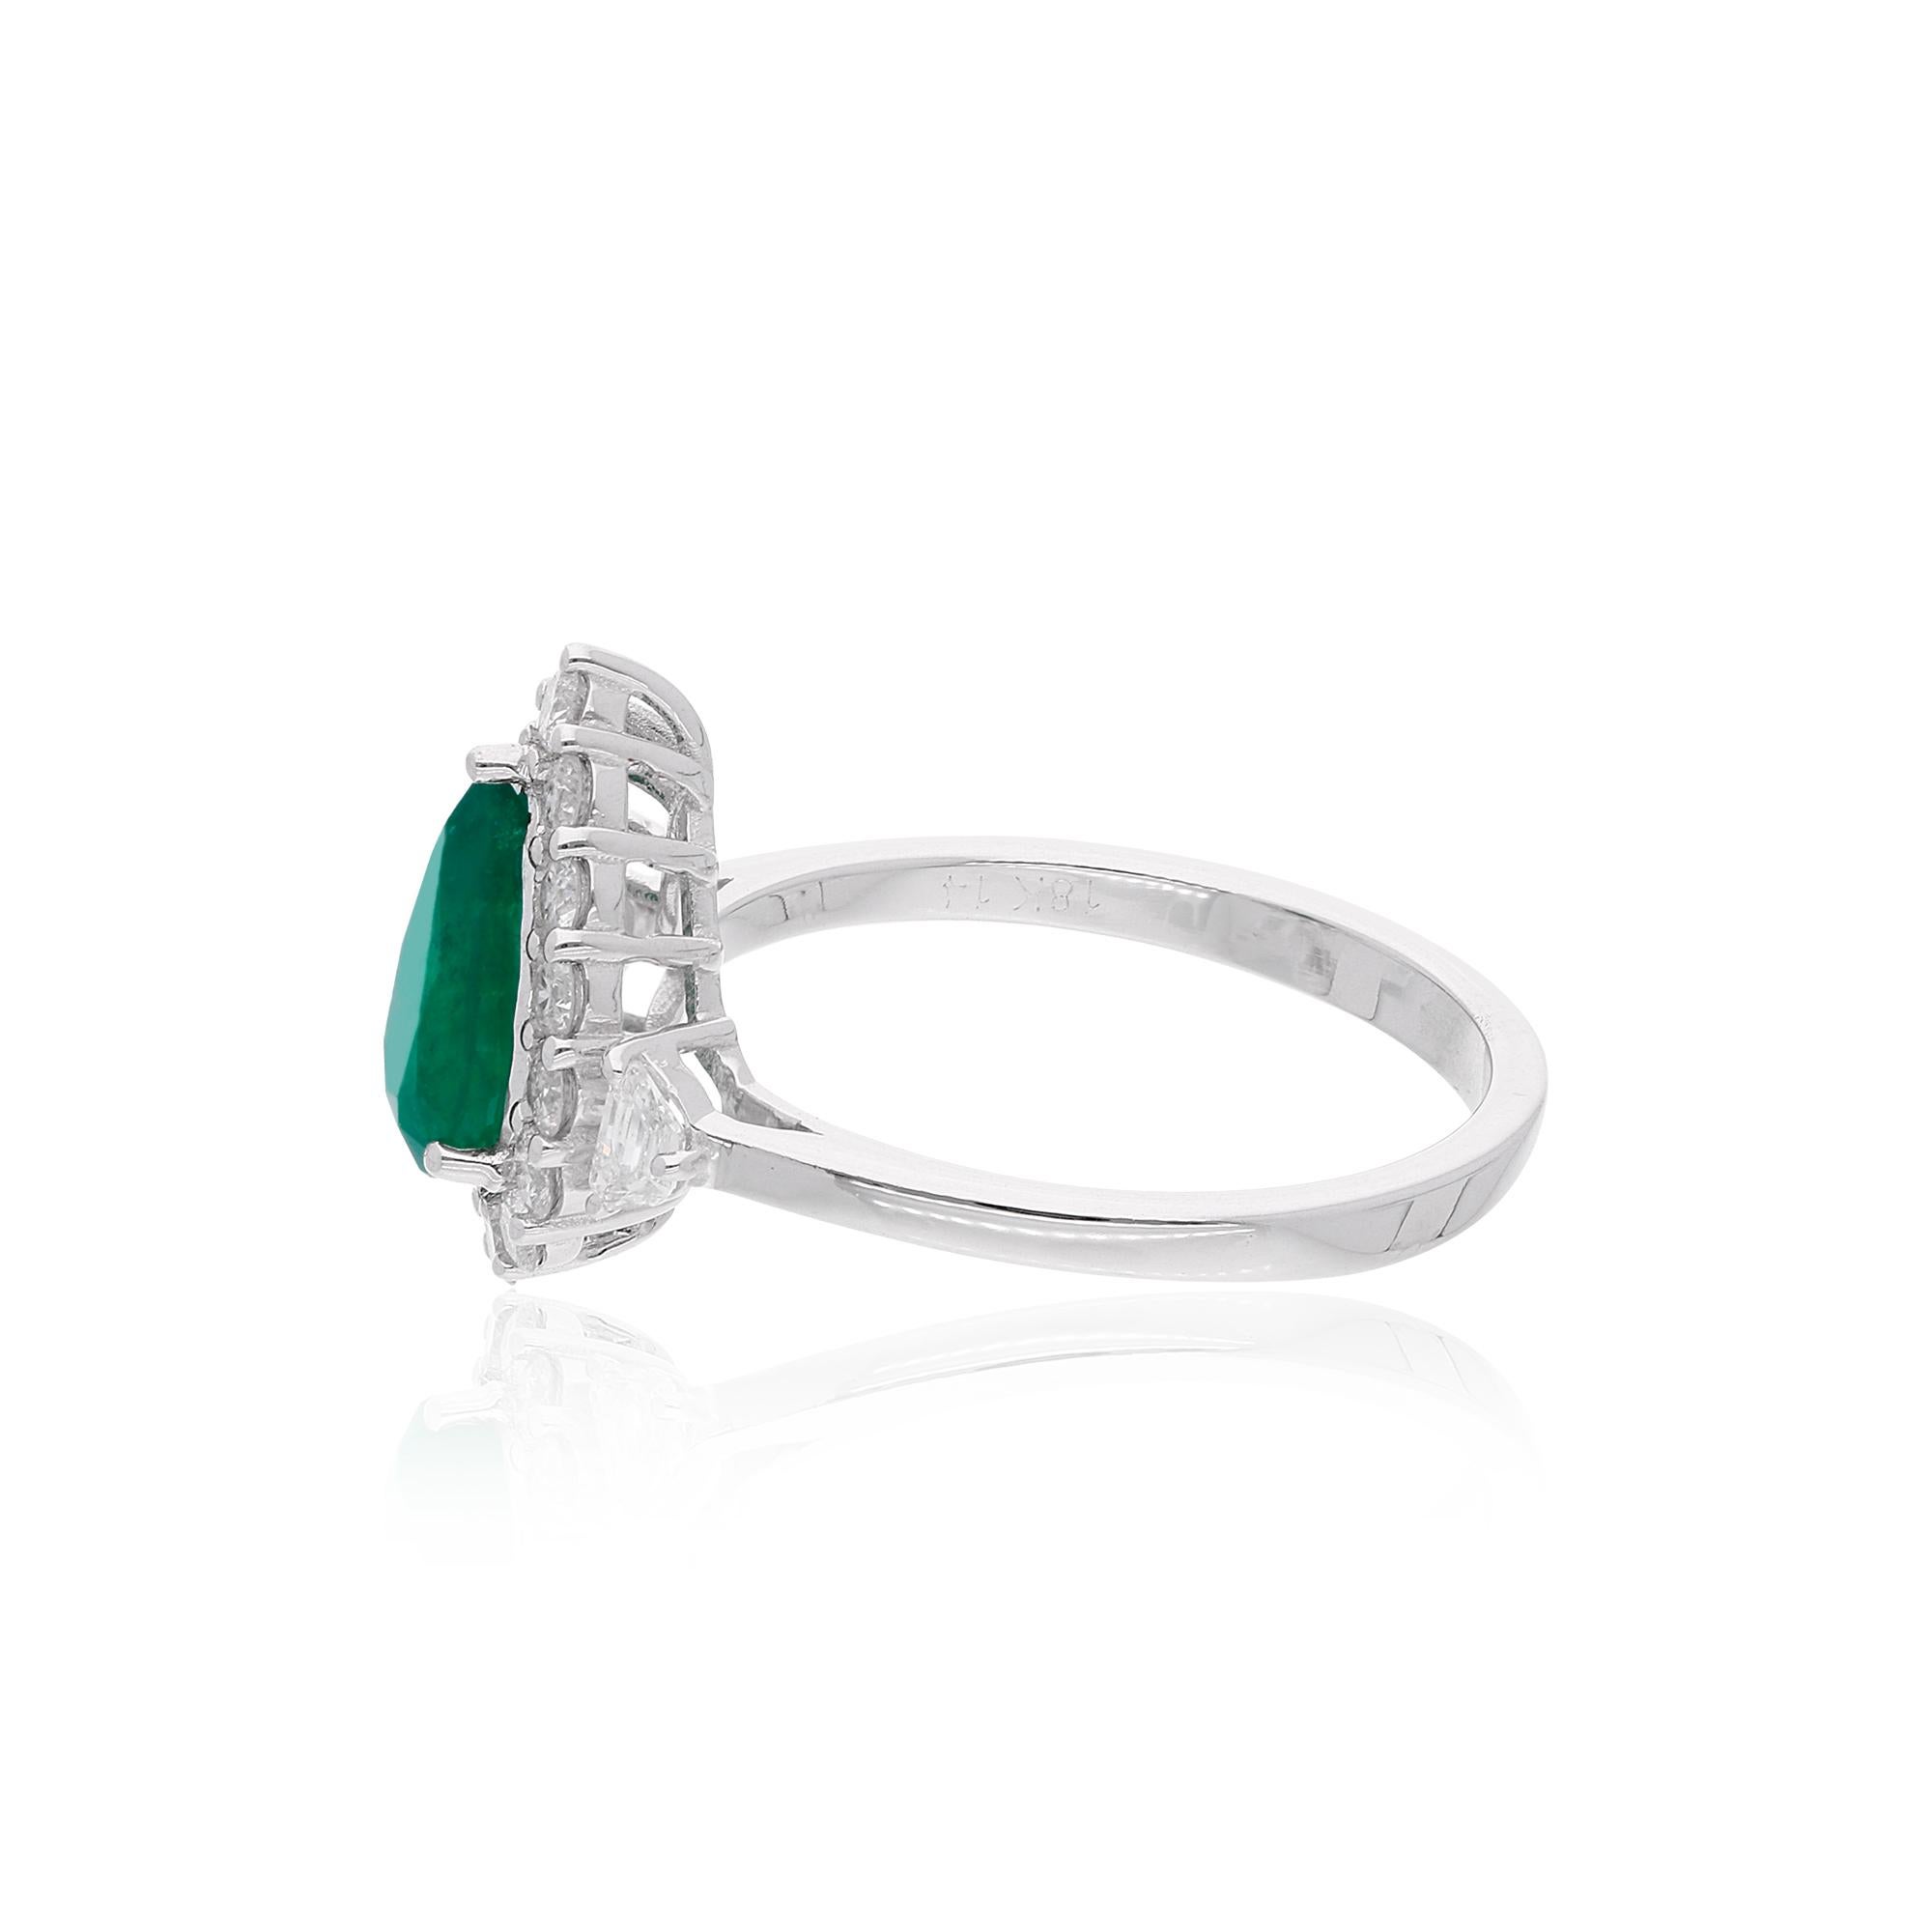 Item Code :- SER-22717
Gross Wt. :- 3.76 gm
18k white Gold Wt. :- 3.40 gm
Natural Diamond Wt. :- 0.63 Ct. ( AVERAGE DIAMOND CLARITY SI1-SI2 & COLOR H-I )
Natural Emerald Wt. :- 1.17 Ct. 
Ring Size :- 7 US & All size available

✦ Import Duties, Taxes